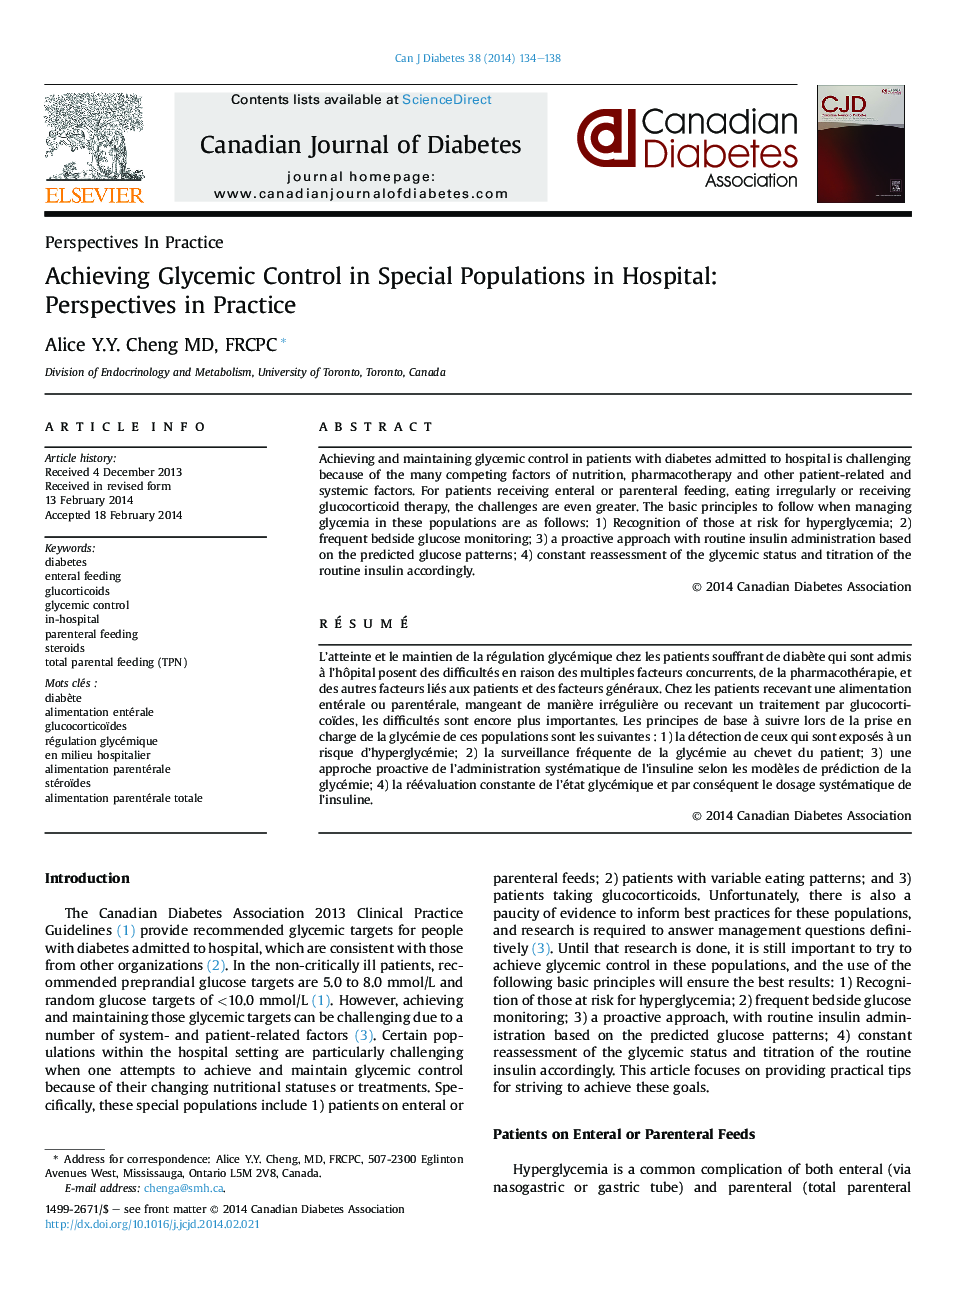 Achieving Glycemic Control in Special Populations in Hospital: Perspectives in Practice